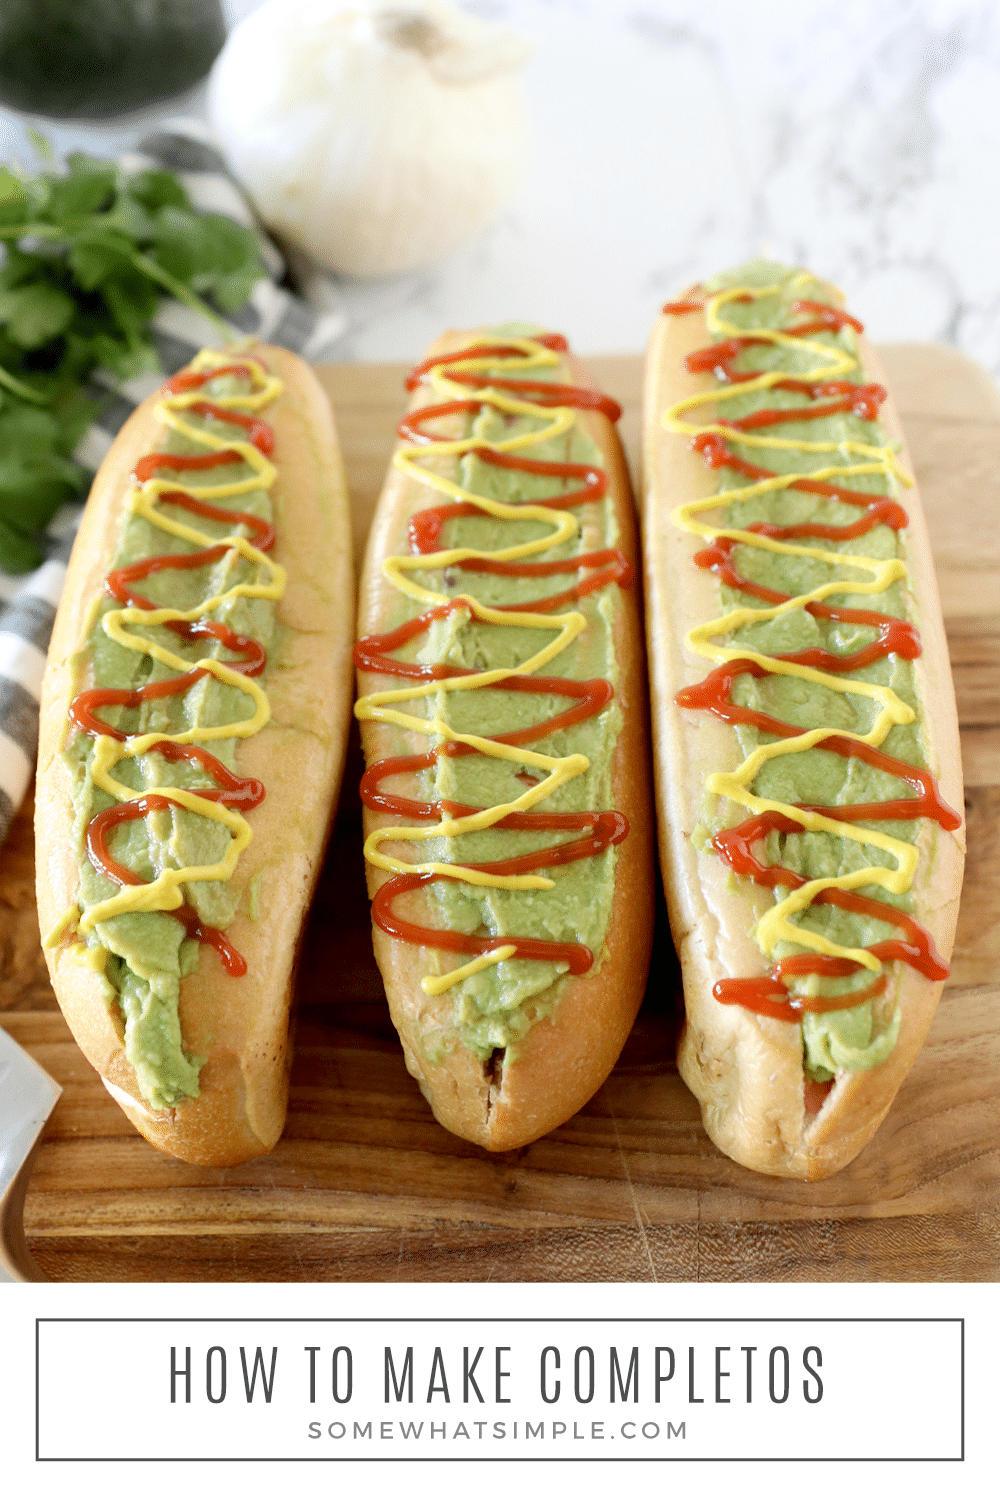 Chilean-style hot dogs called completos are filled with several delicious toppings. Completos are loaded with diced tomatoes and onions, fresh avocado, ketchup and mustard. You'll never eat a hot dog the same way again. via @somewhatsimple